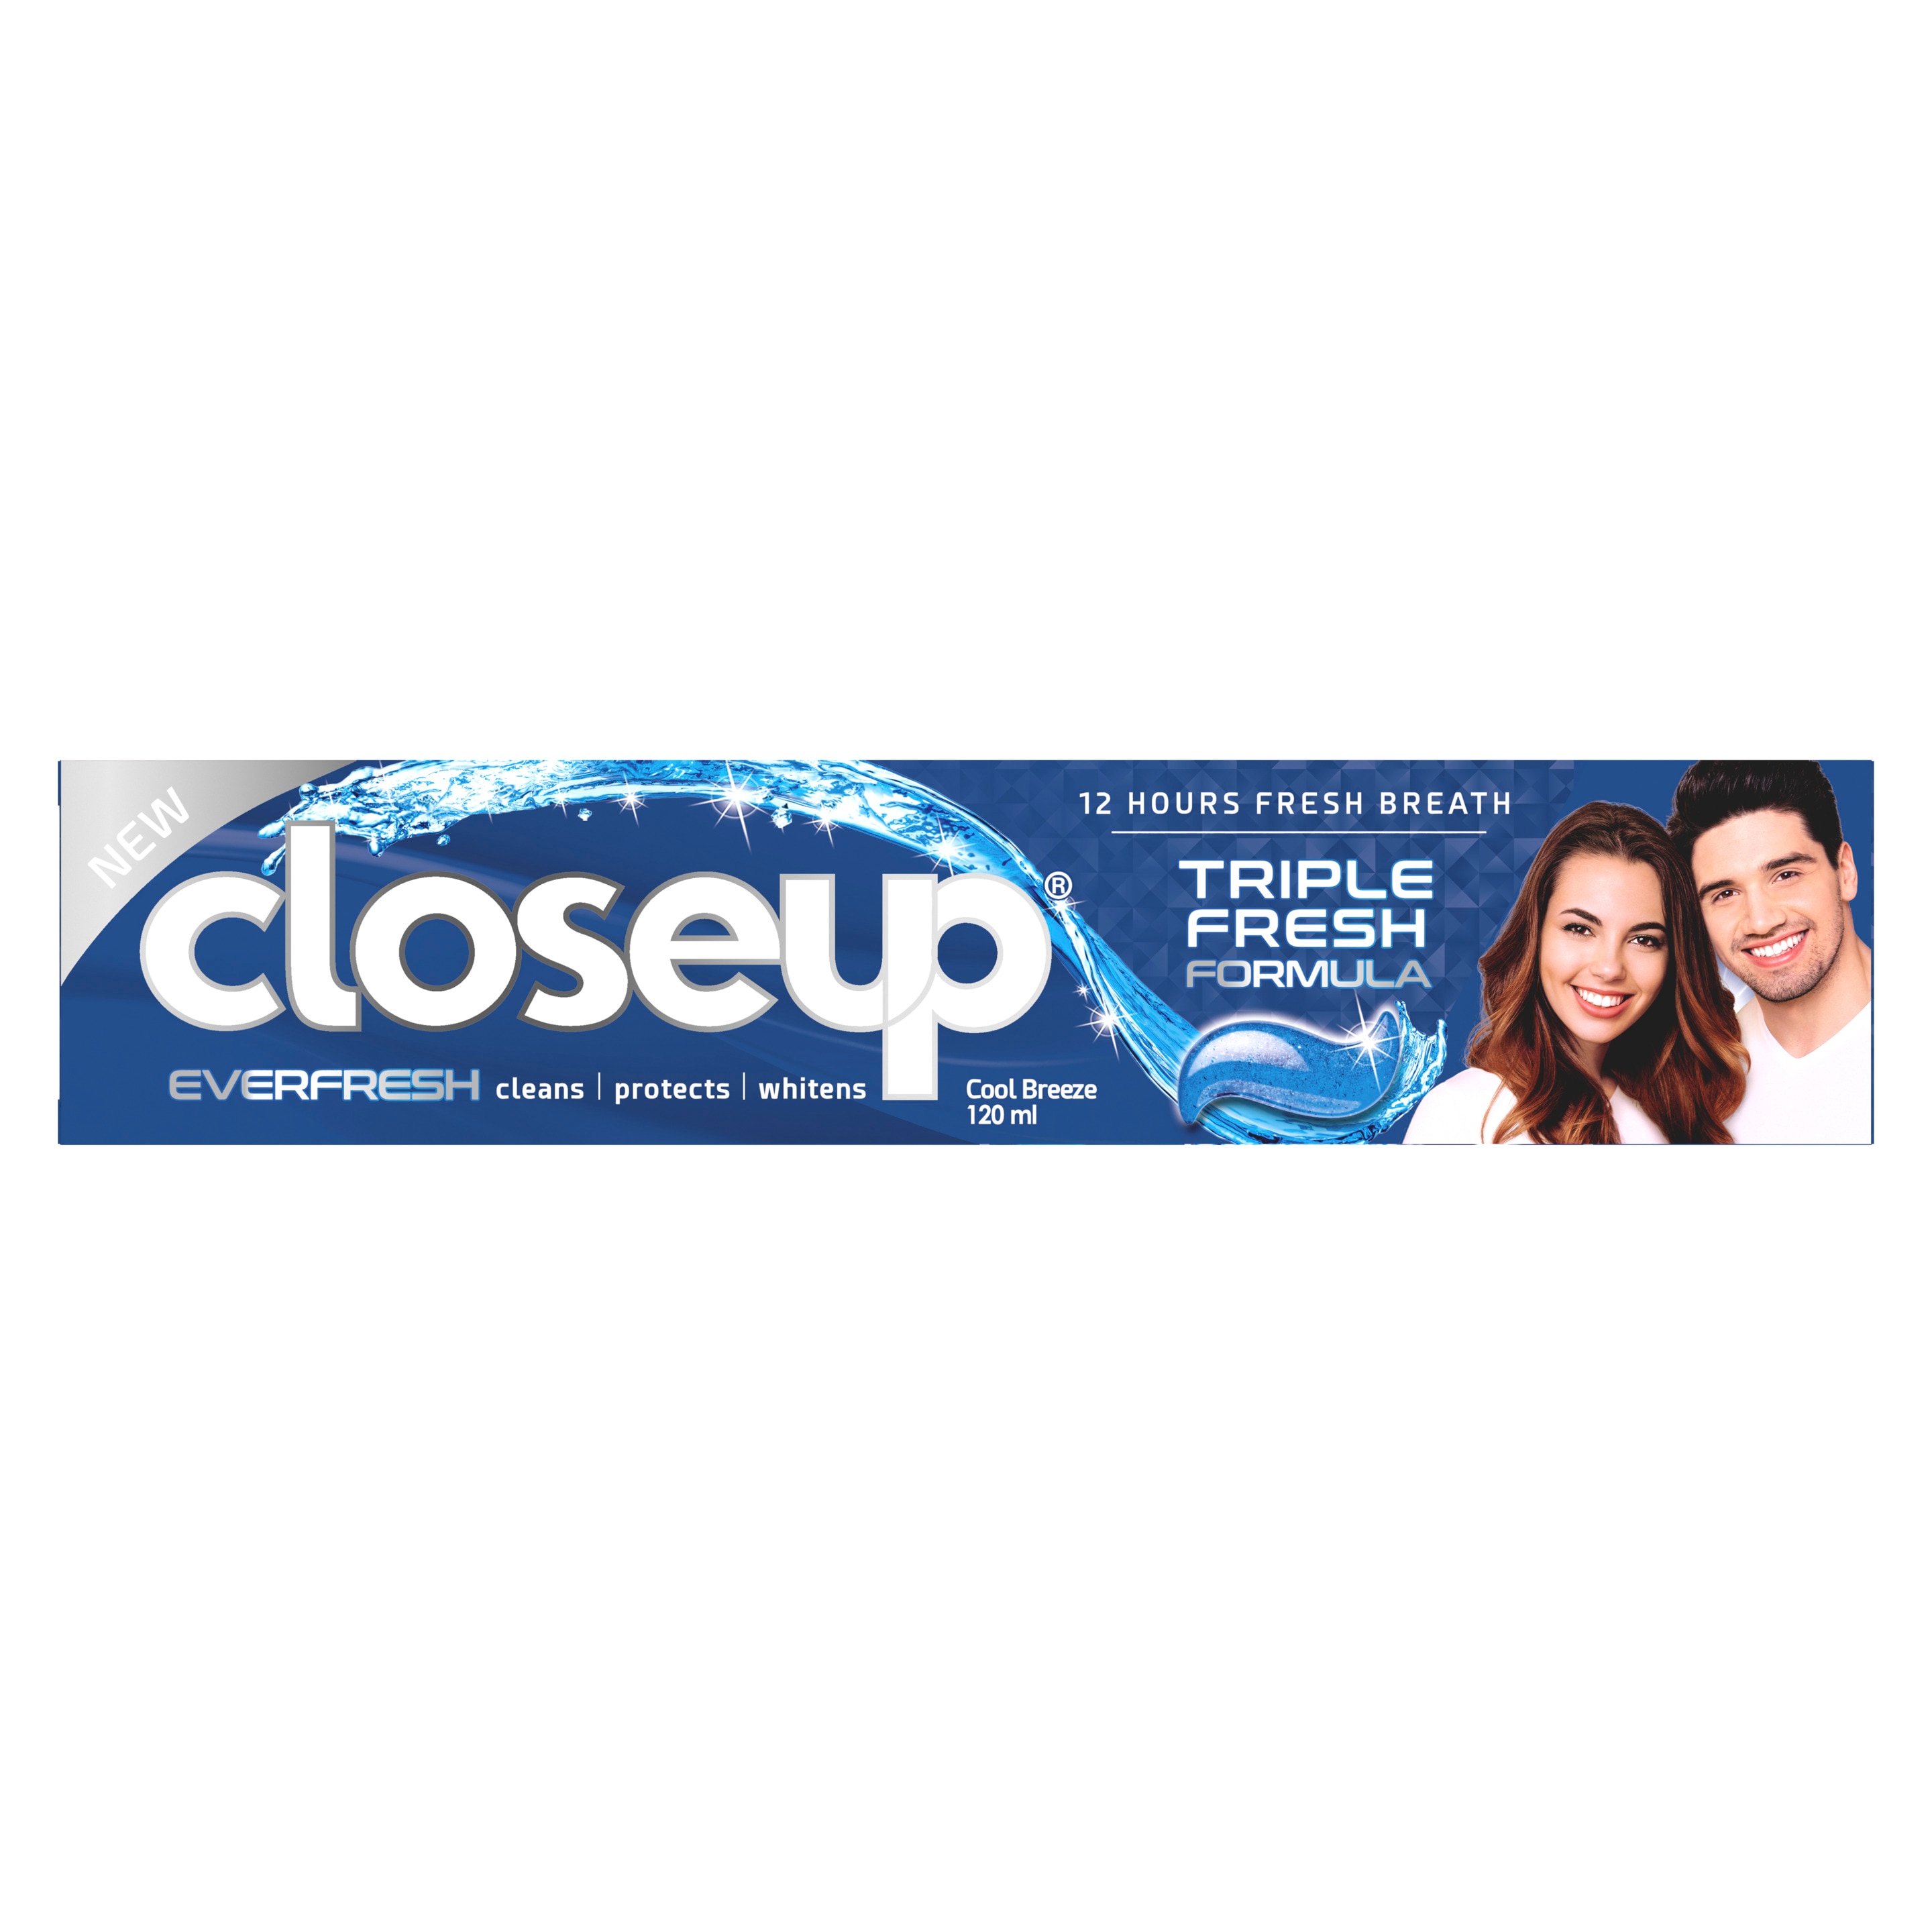 Closeup® Cool Breeze Toothpaste Keeps you Protected & Fresh